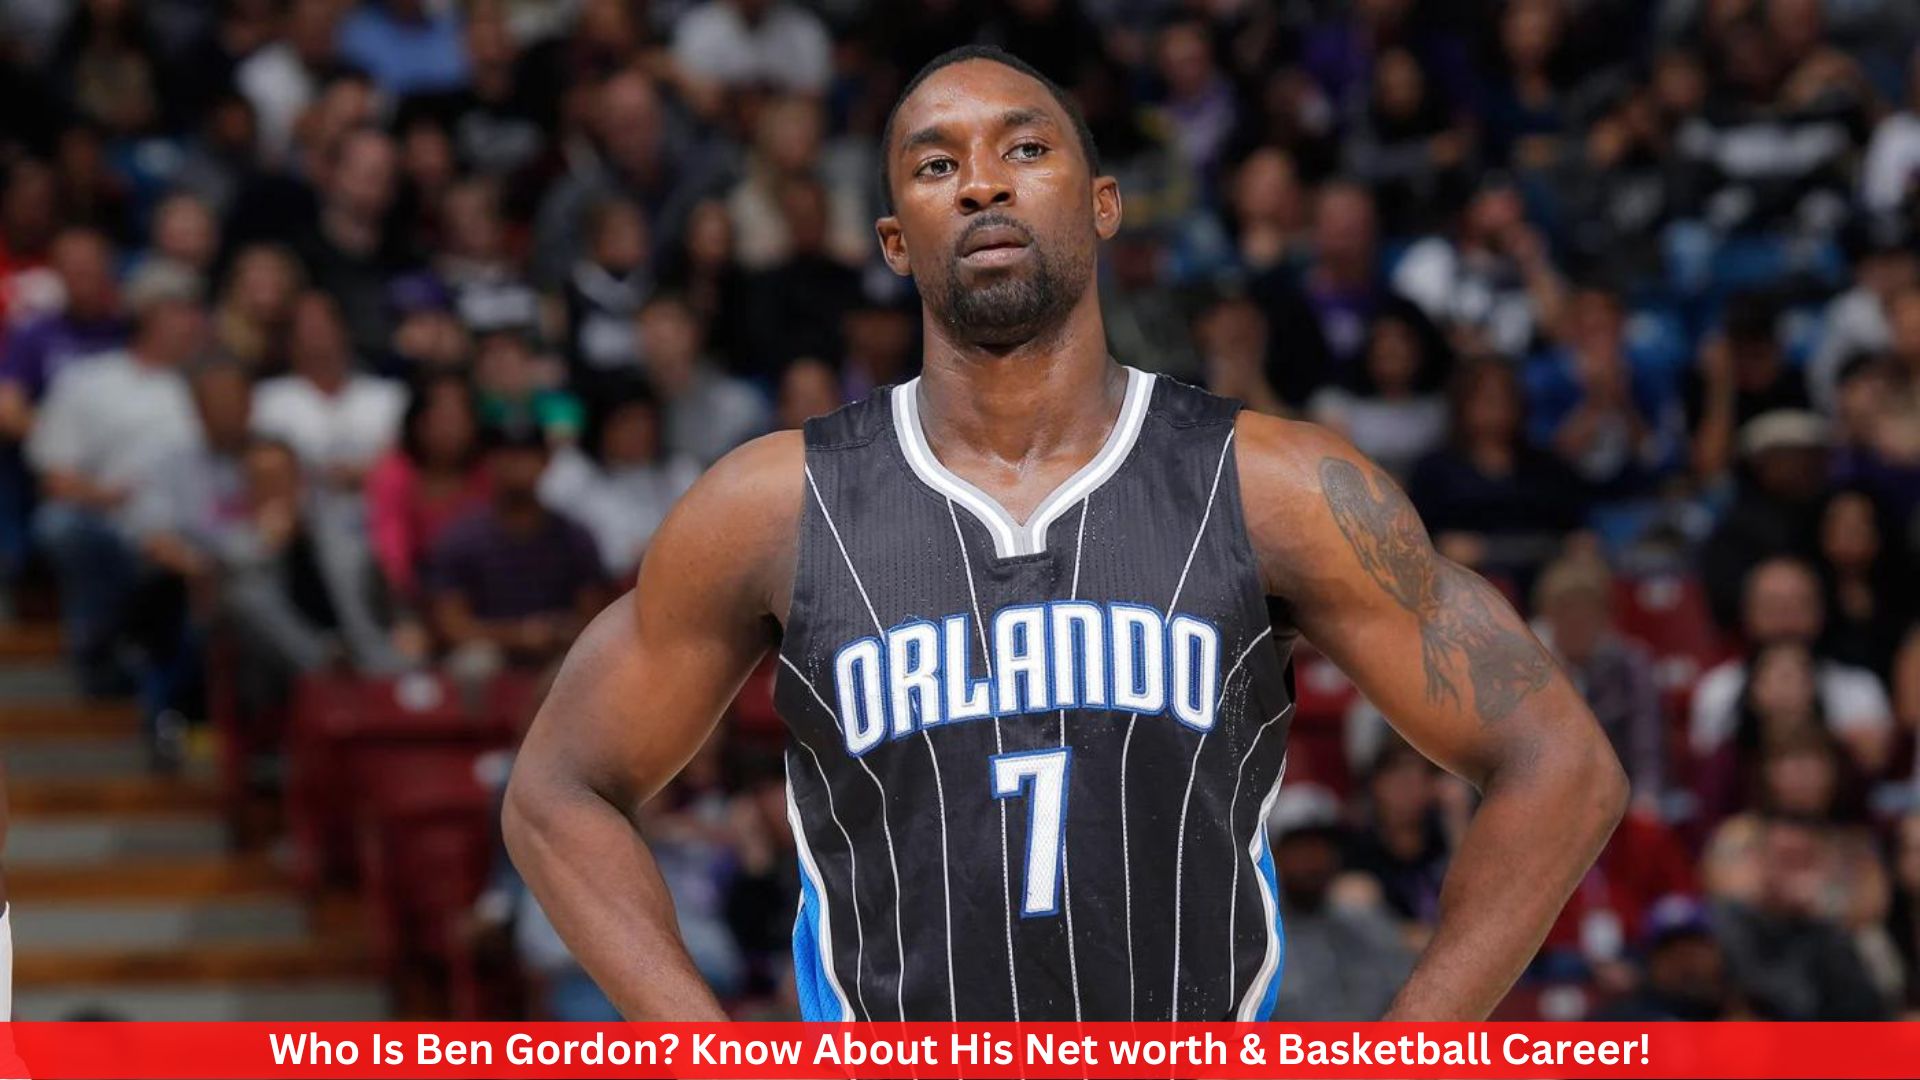 Who Is Ben Gordon? Know About His Net worth & Basketball Career!